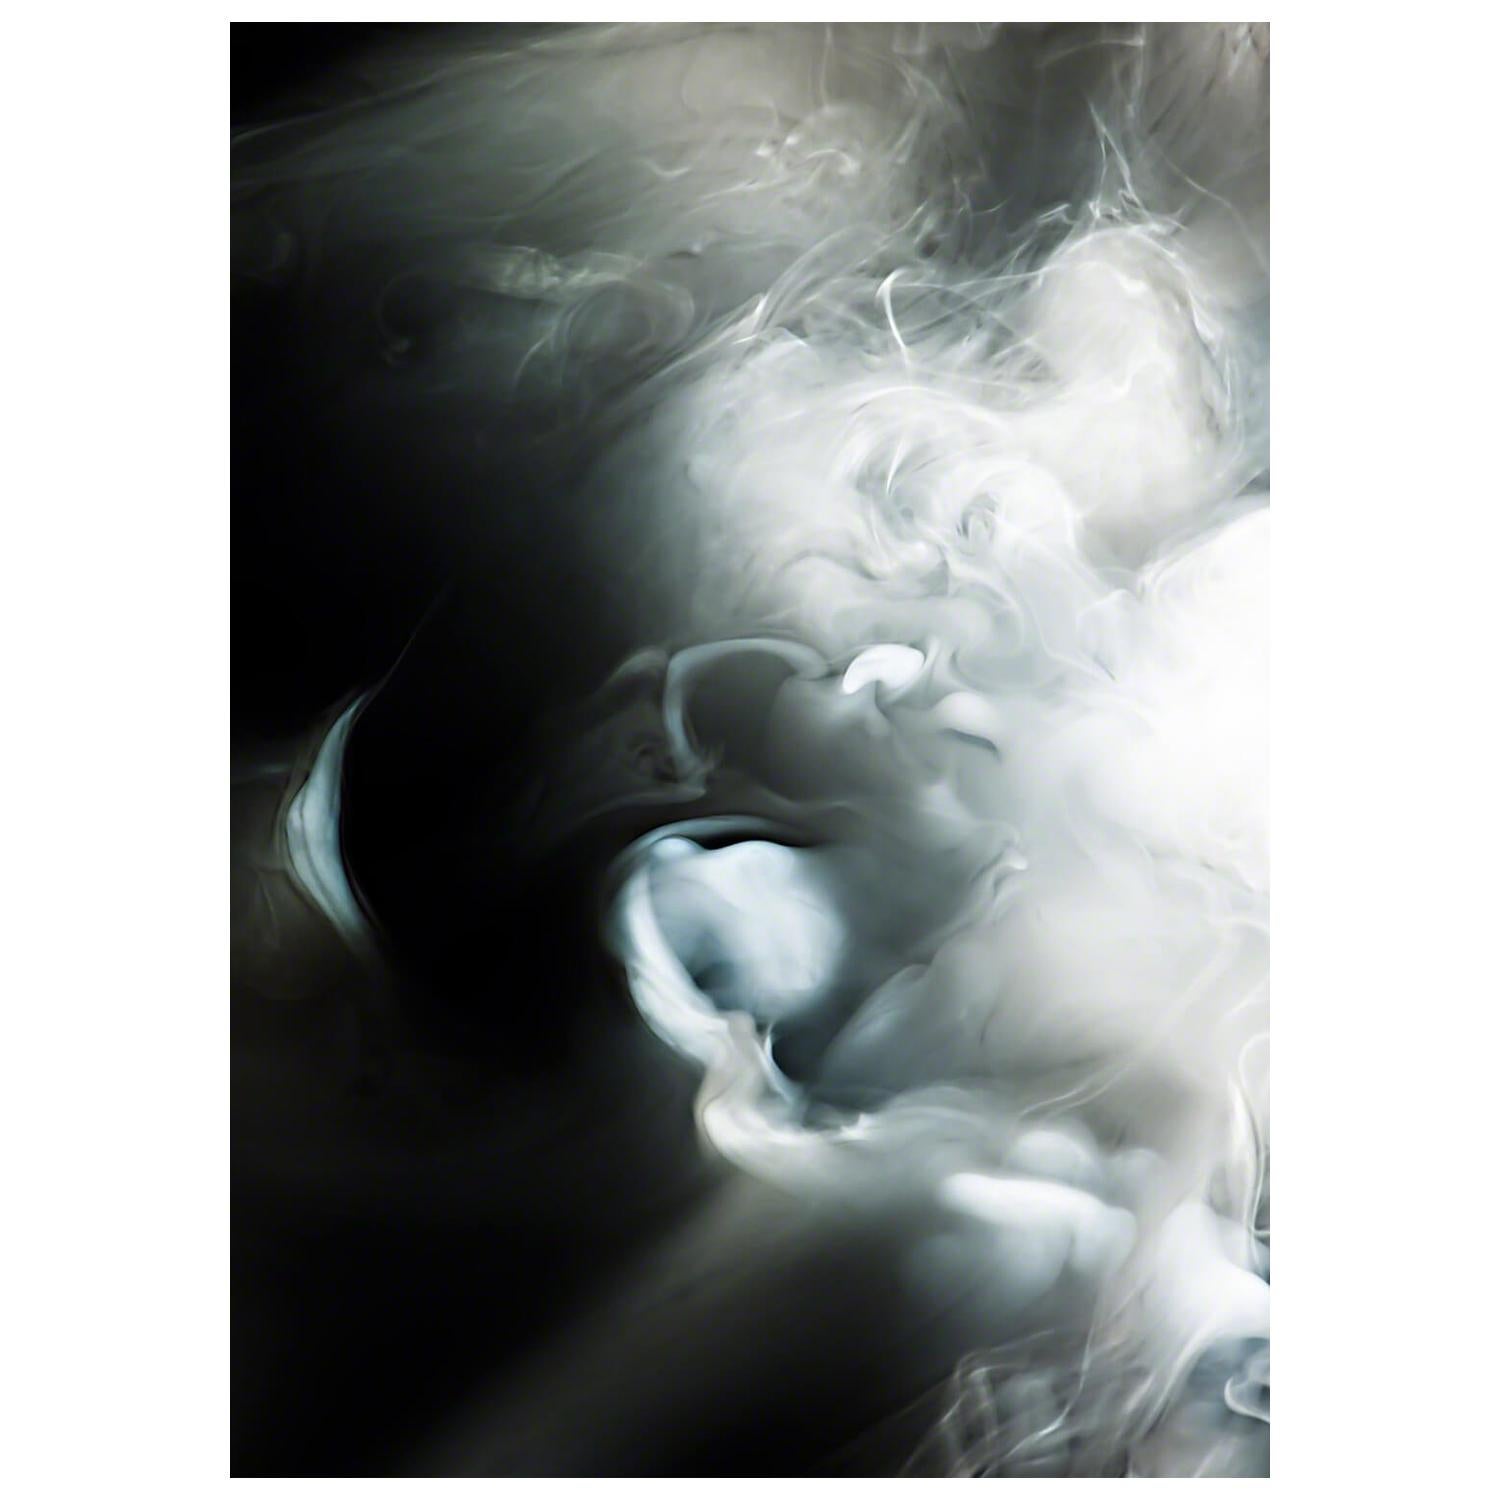 Daniele Albright, "Smoke and Mirrors 1", Art, 2014 For Sale